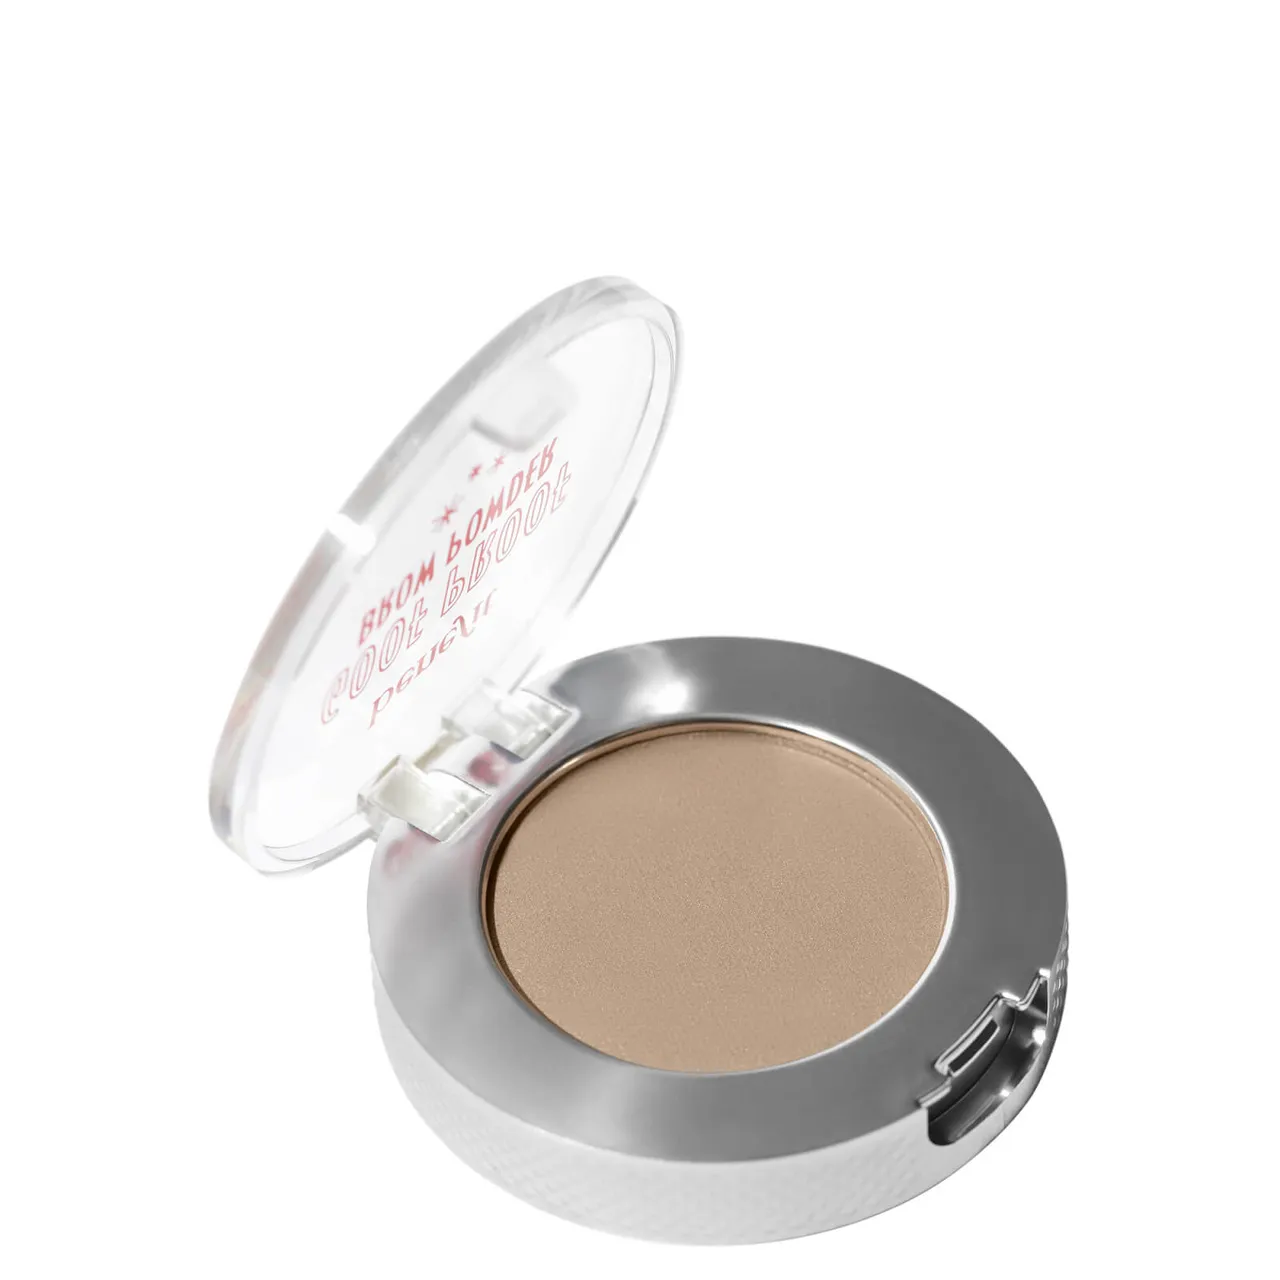 benefit Goof Proof Easy Brow Filling Powder 1.9g (Various Shades) - 01 Cool Light Blonde